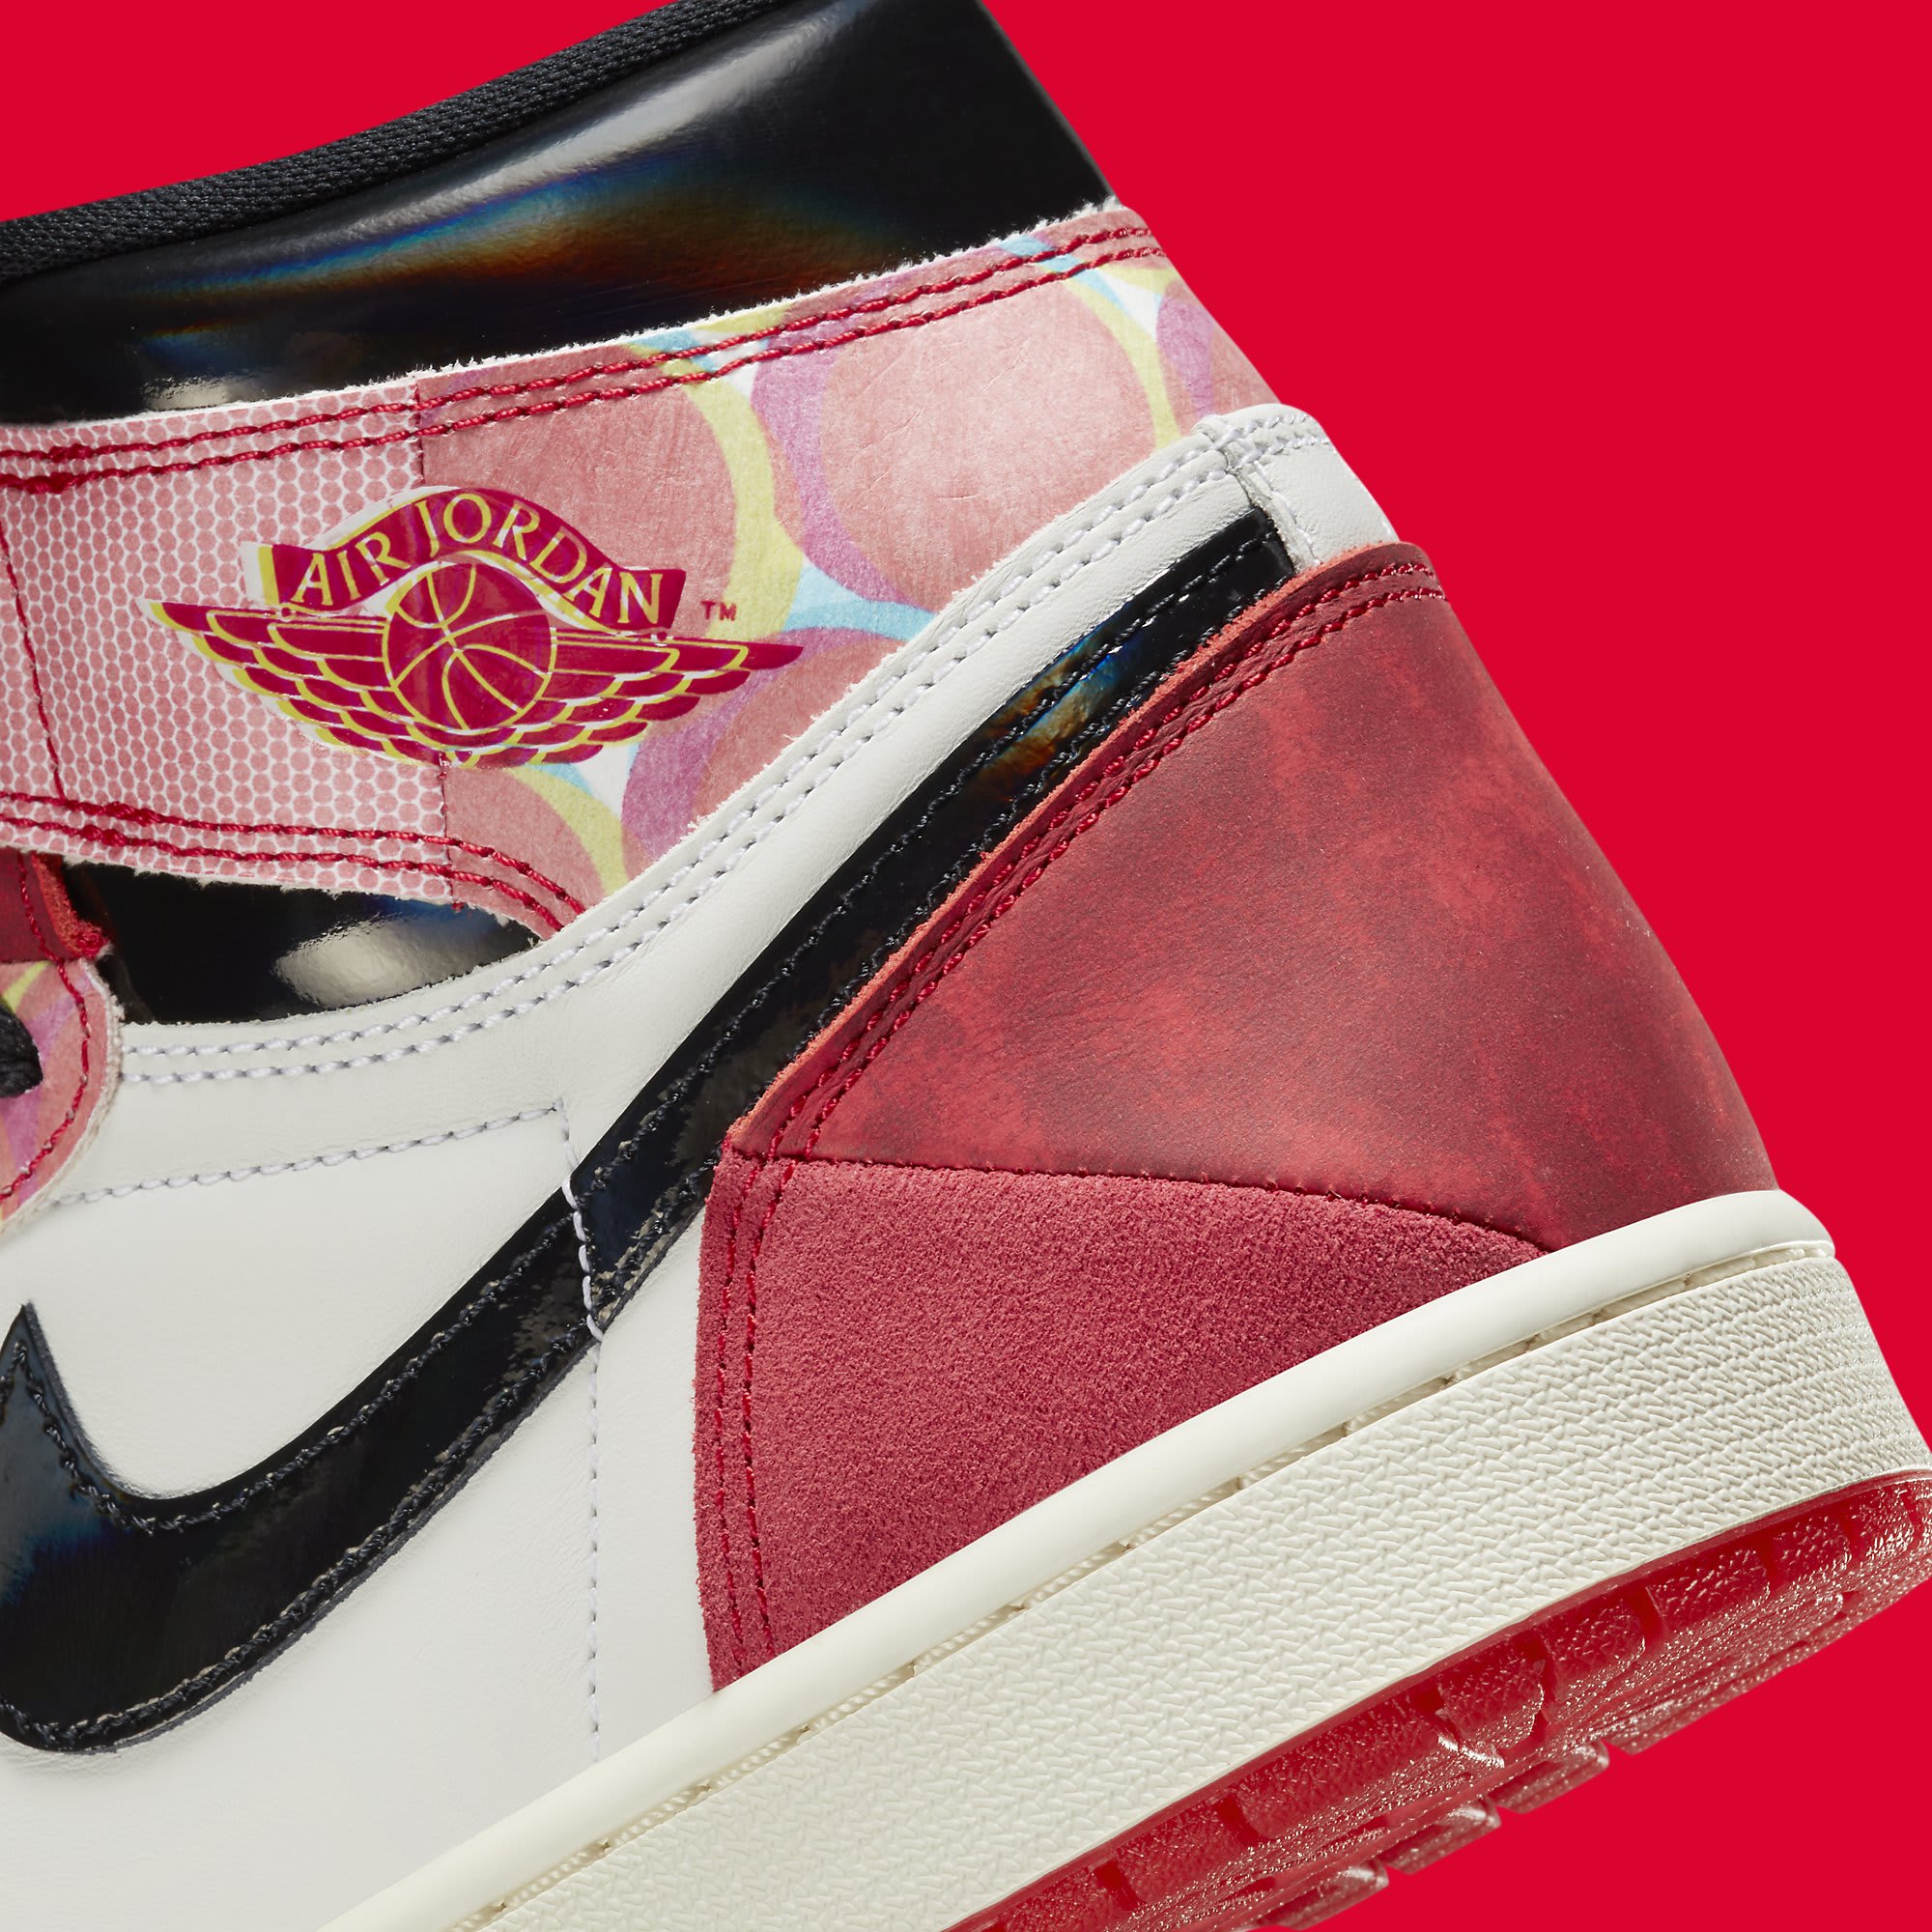 Official Look at the 'Spider Man Across the Spider Verse' Air Jordan 1 Scheduled to drop this month